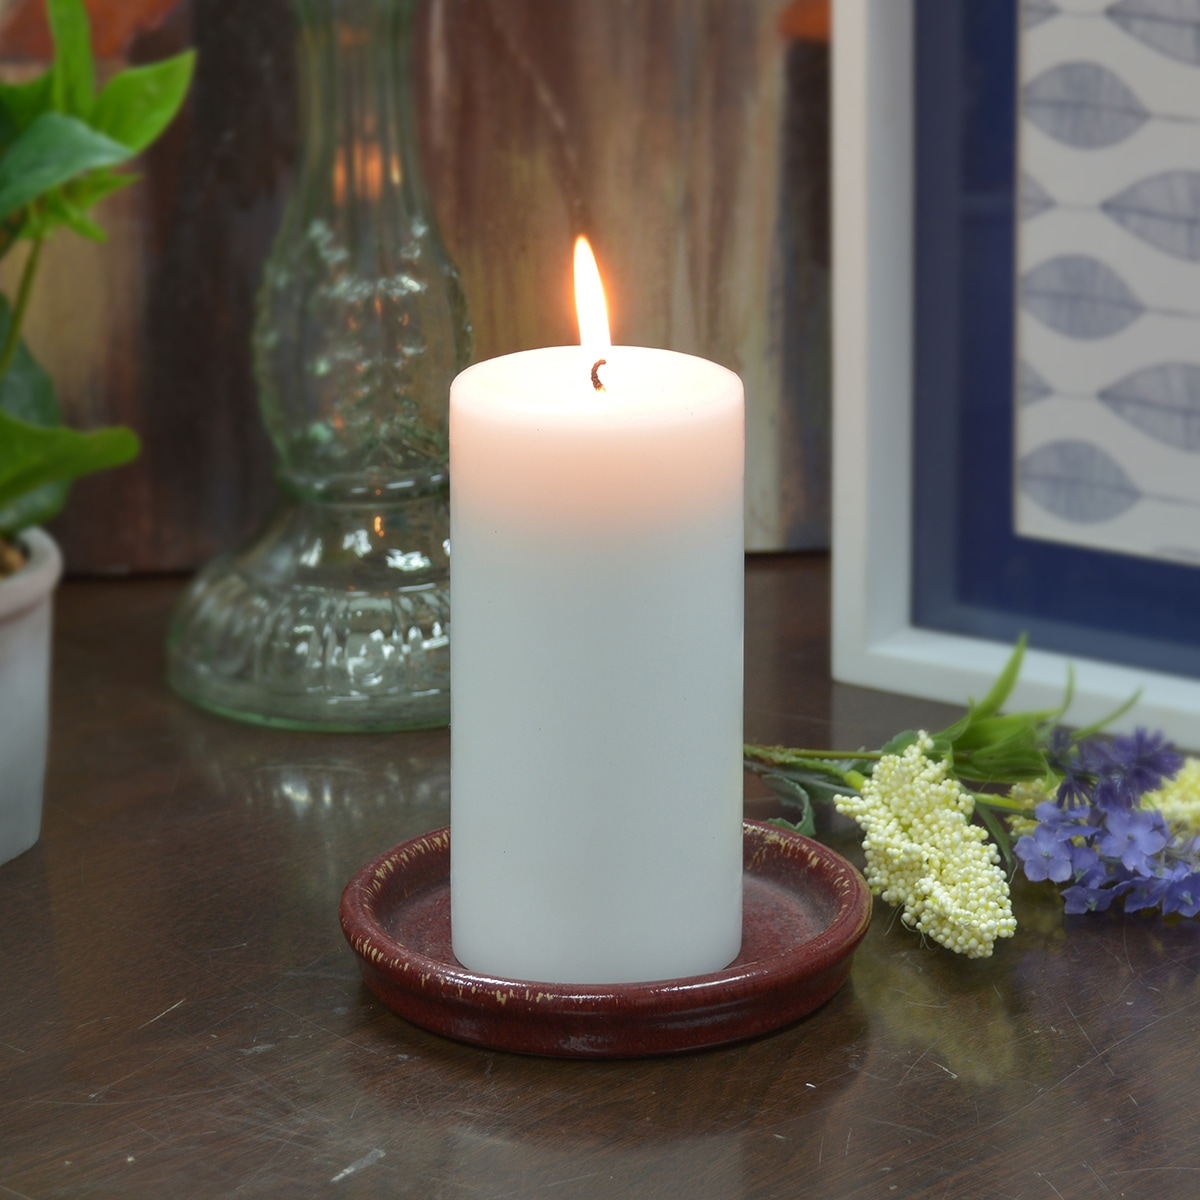 https://ak1.ostkcdn.com/images/products/is/images/direct/3470fc2fbcbc6ff8e25f1a8079dfff6ee901de32/3-x-4-Inch-White-Pillar-Candles---Set-of-6.jpg